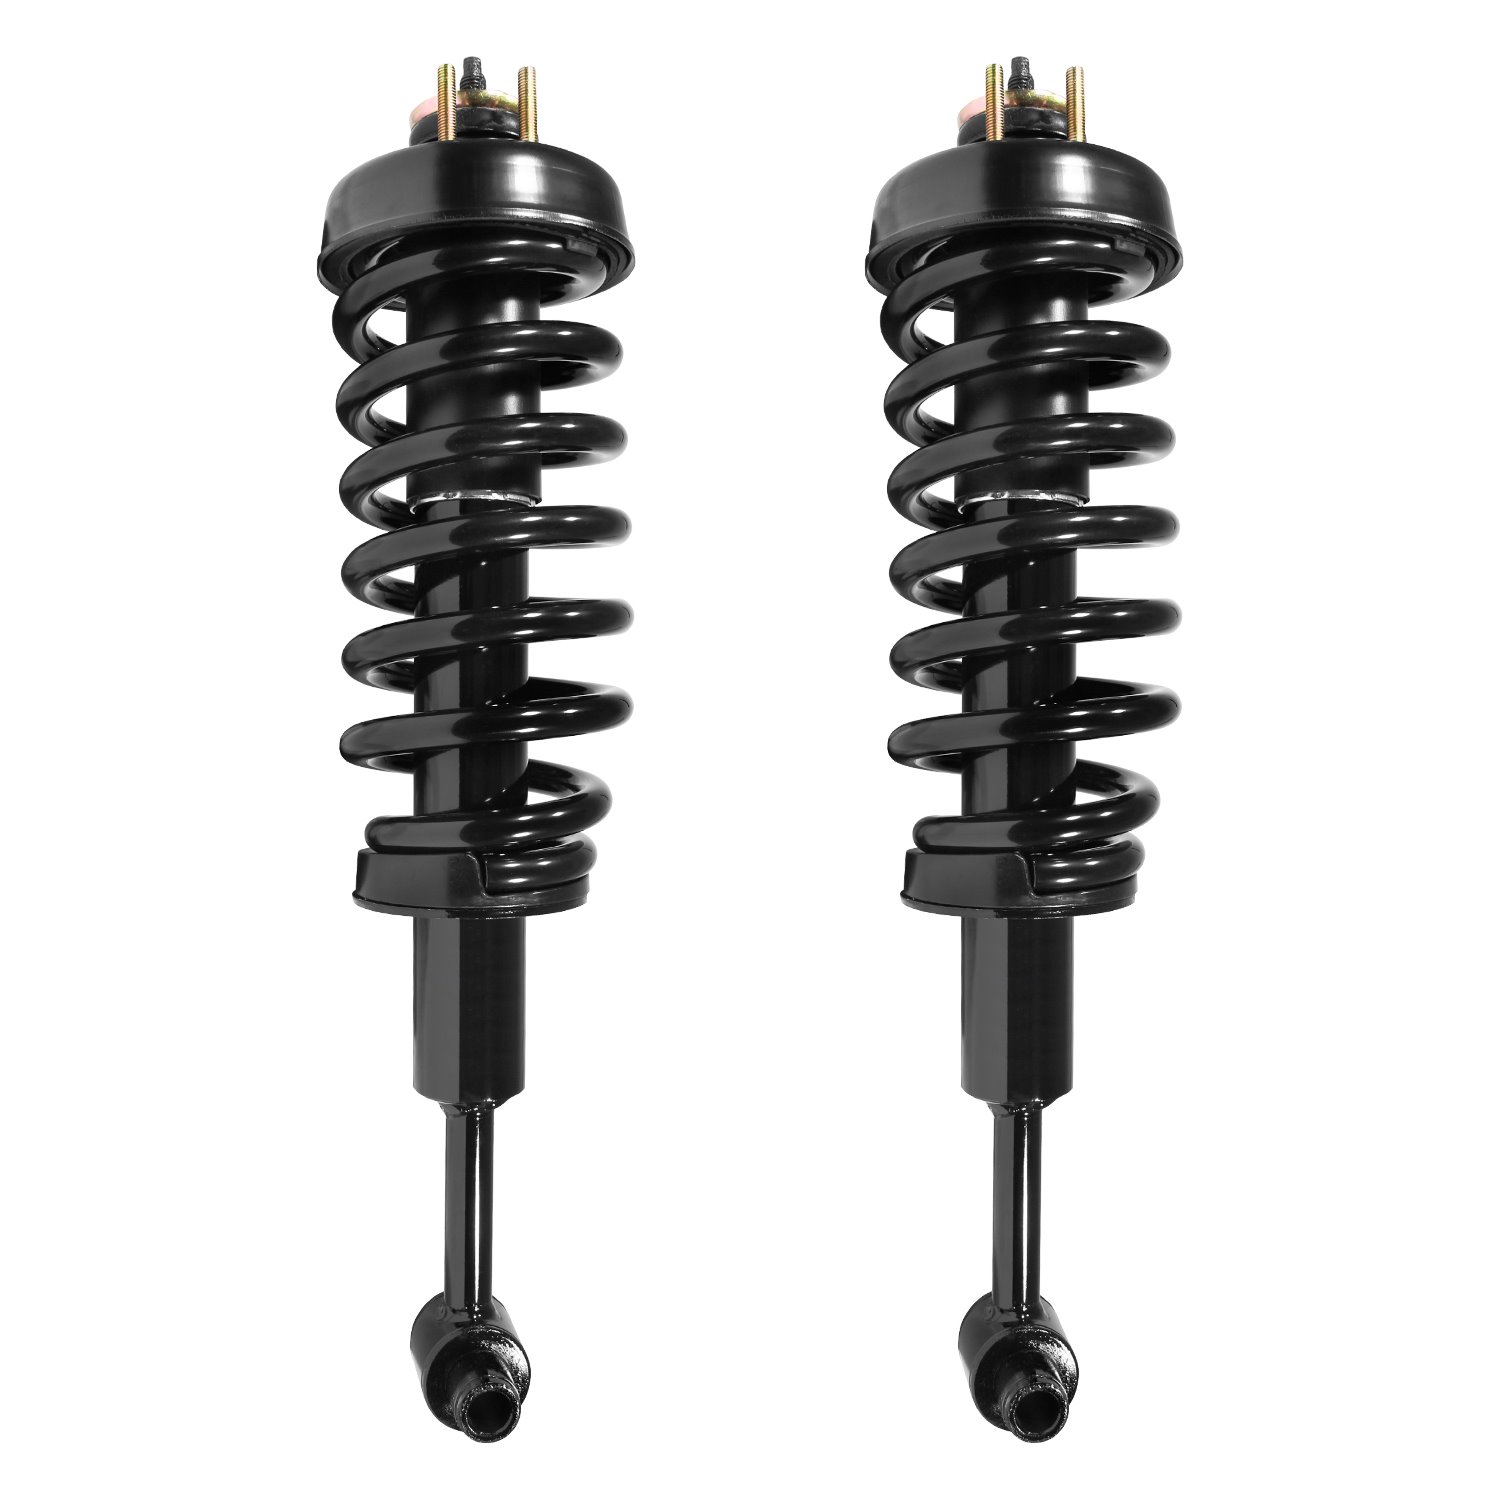 2-11200-001 Suspension Strut & Coil Spring Assembly Set Fits Select Ford Explorer, Mercury Mountaineer